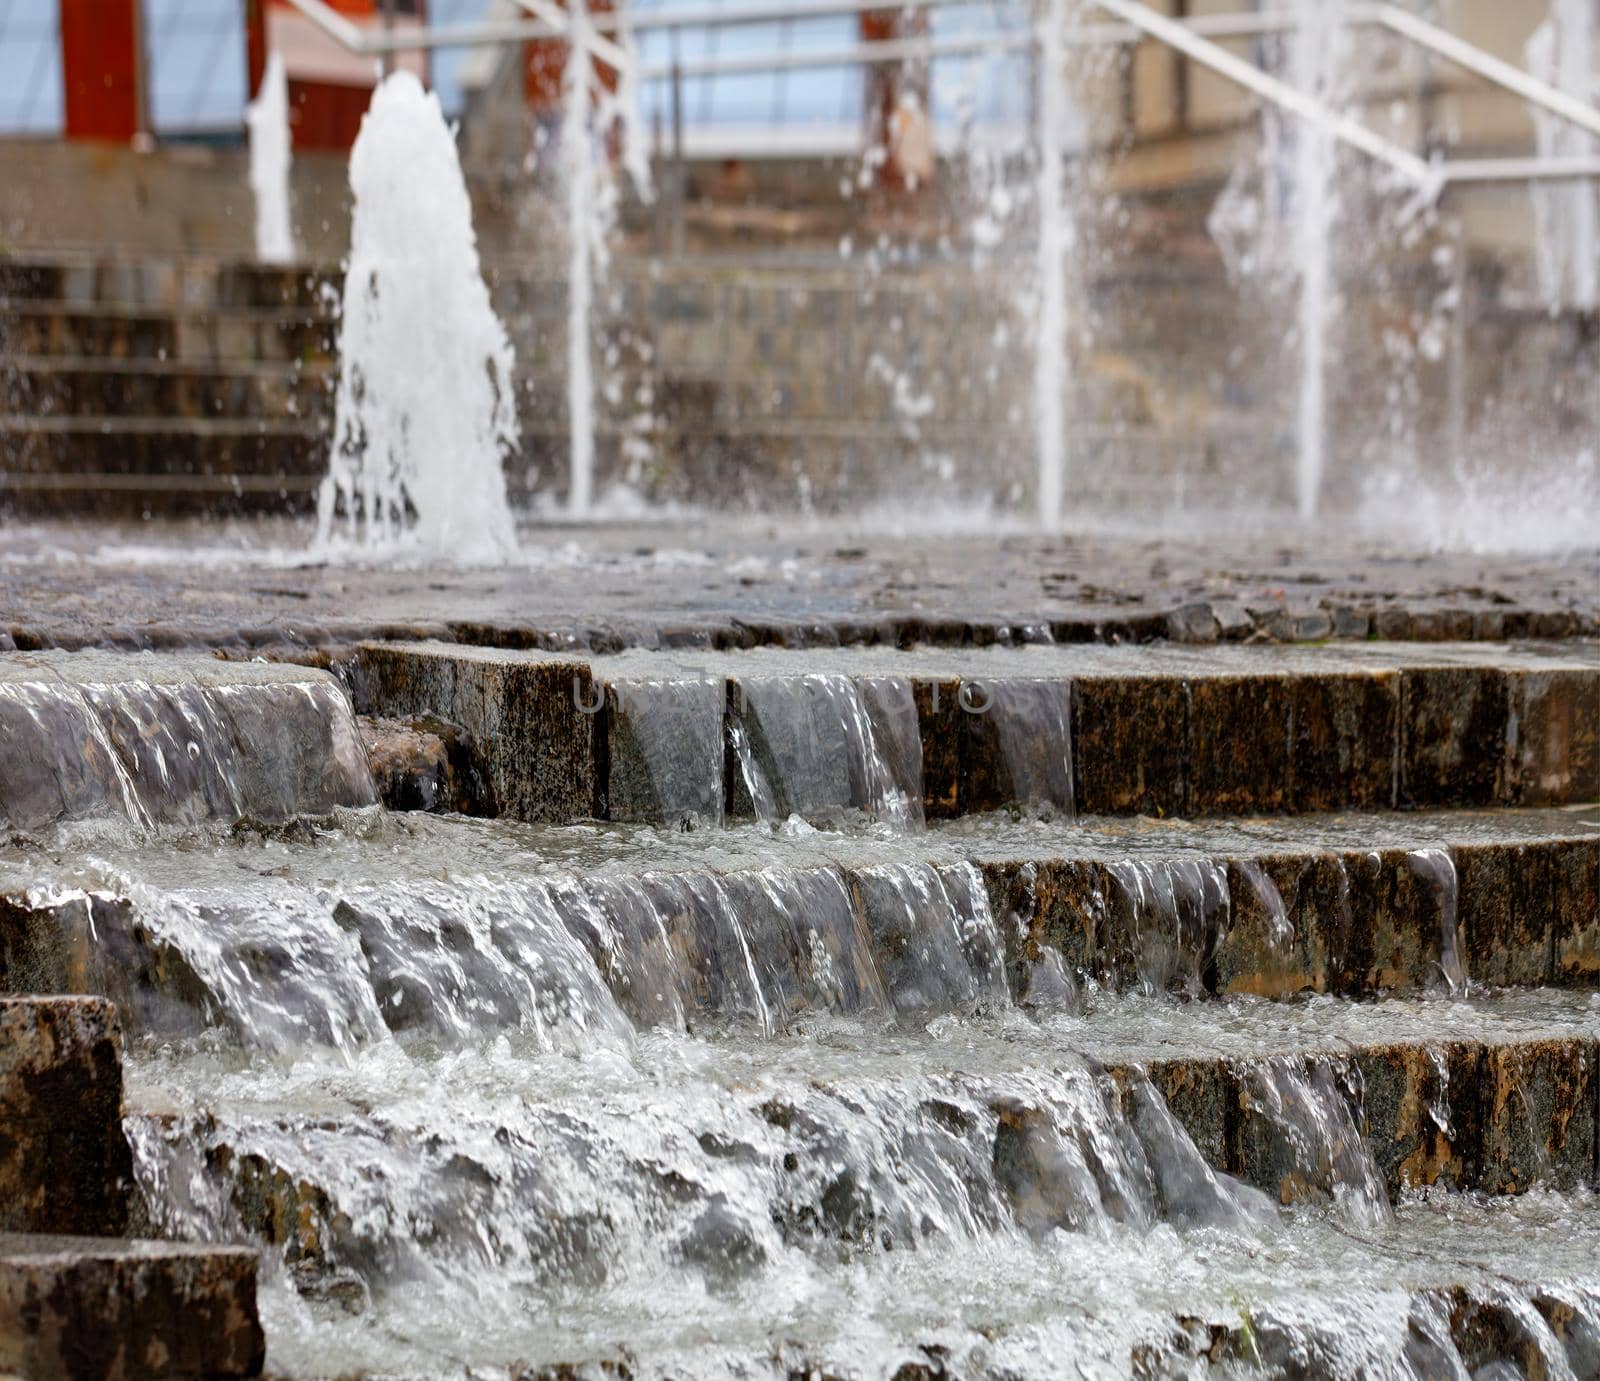 Running water through a cascading stepped fountain. by Sergii